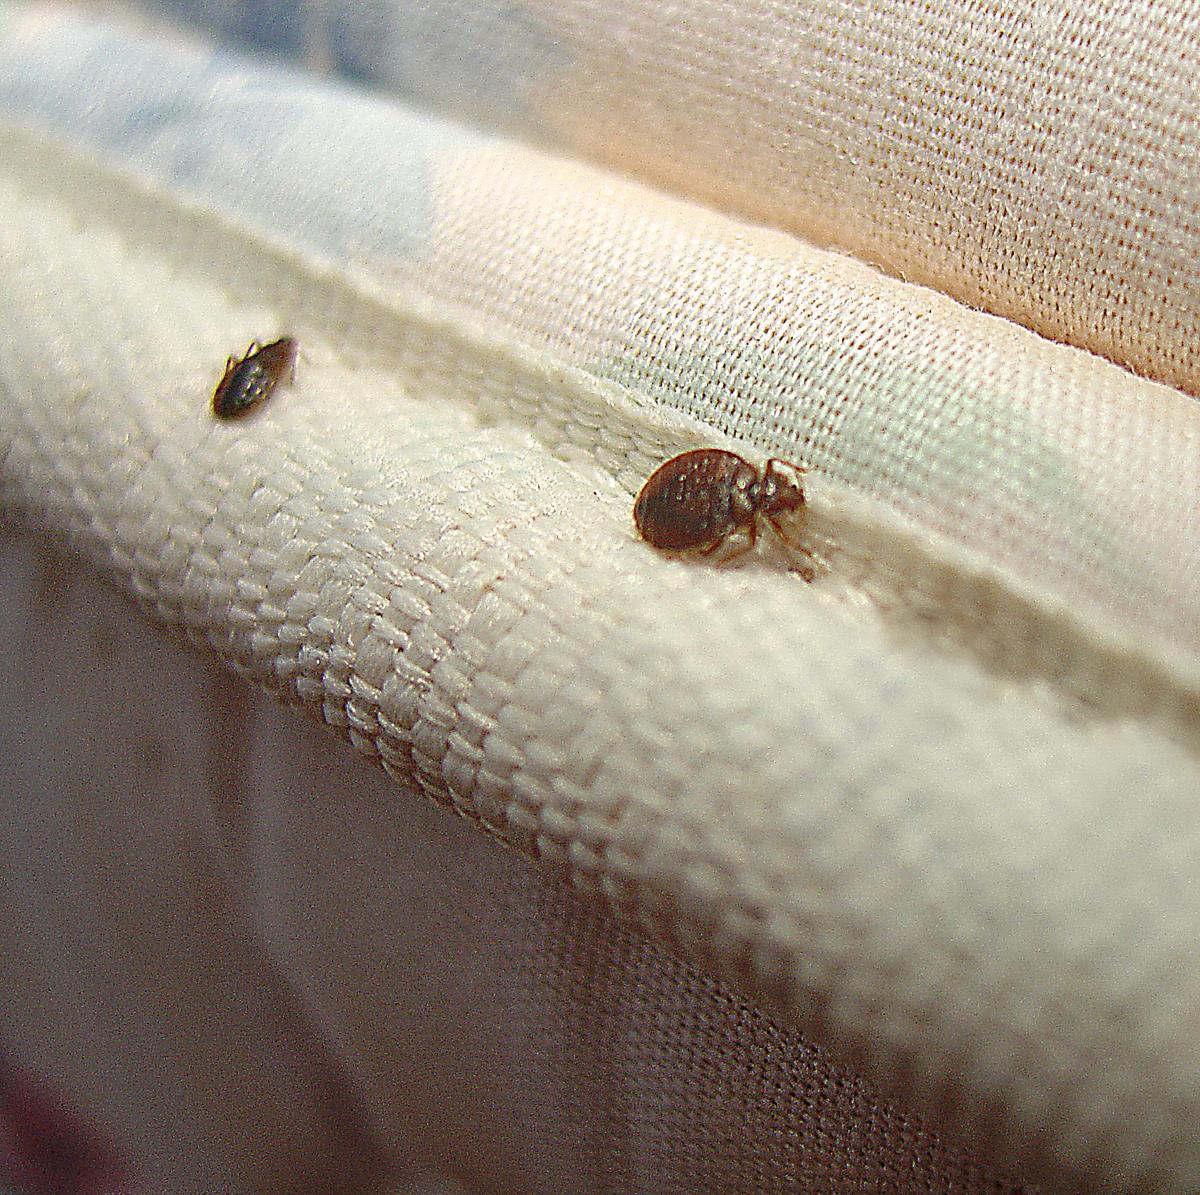 How to Avoid Bringing Bed Bugs When Moving